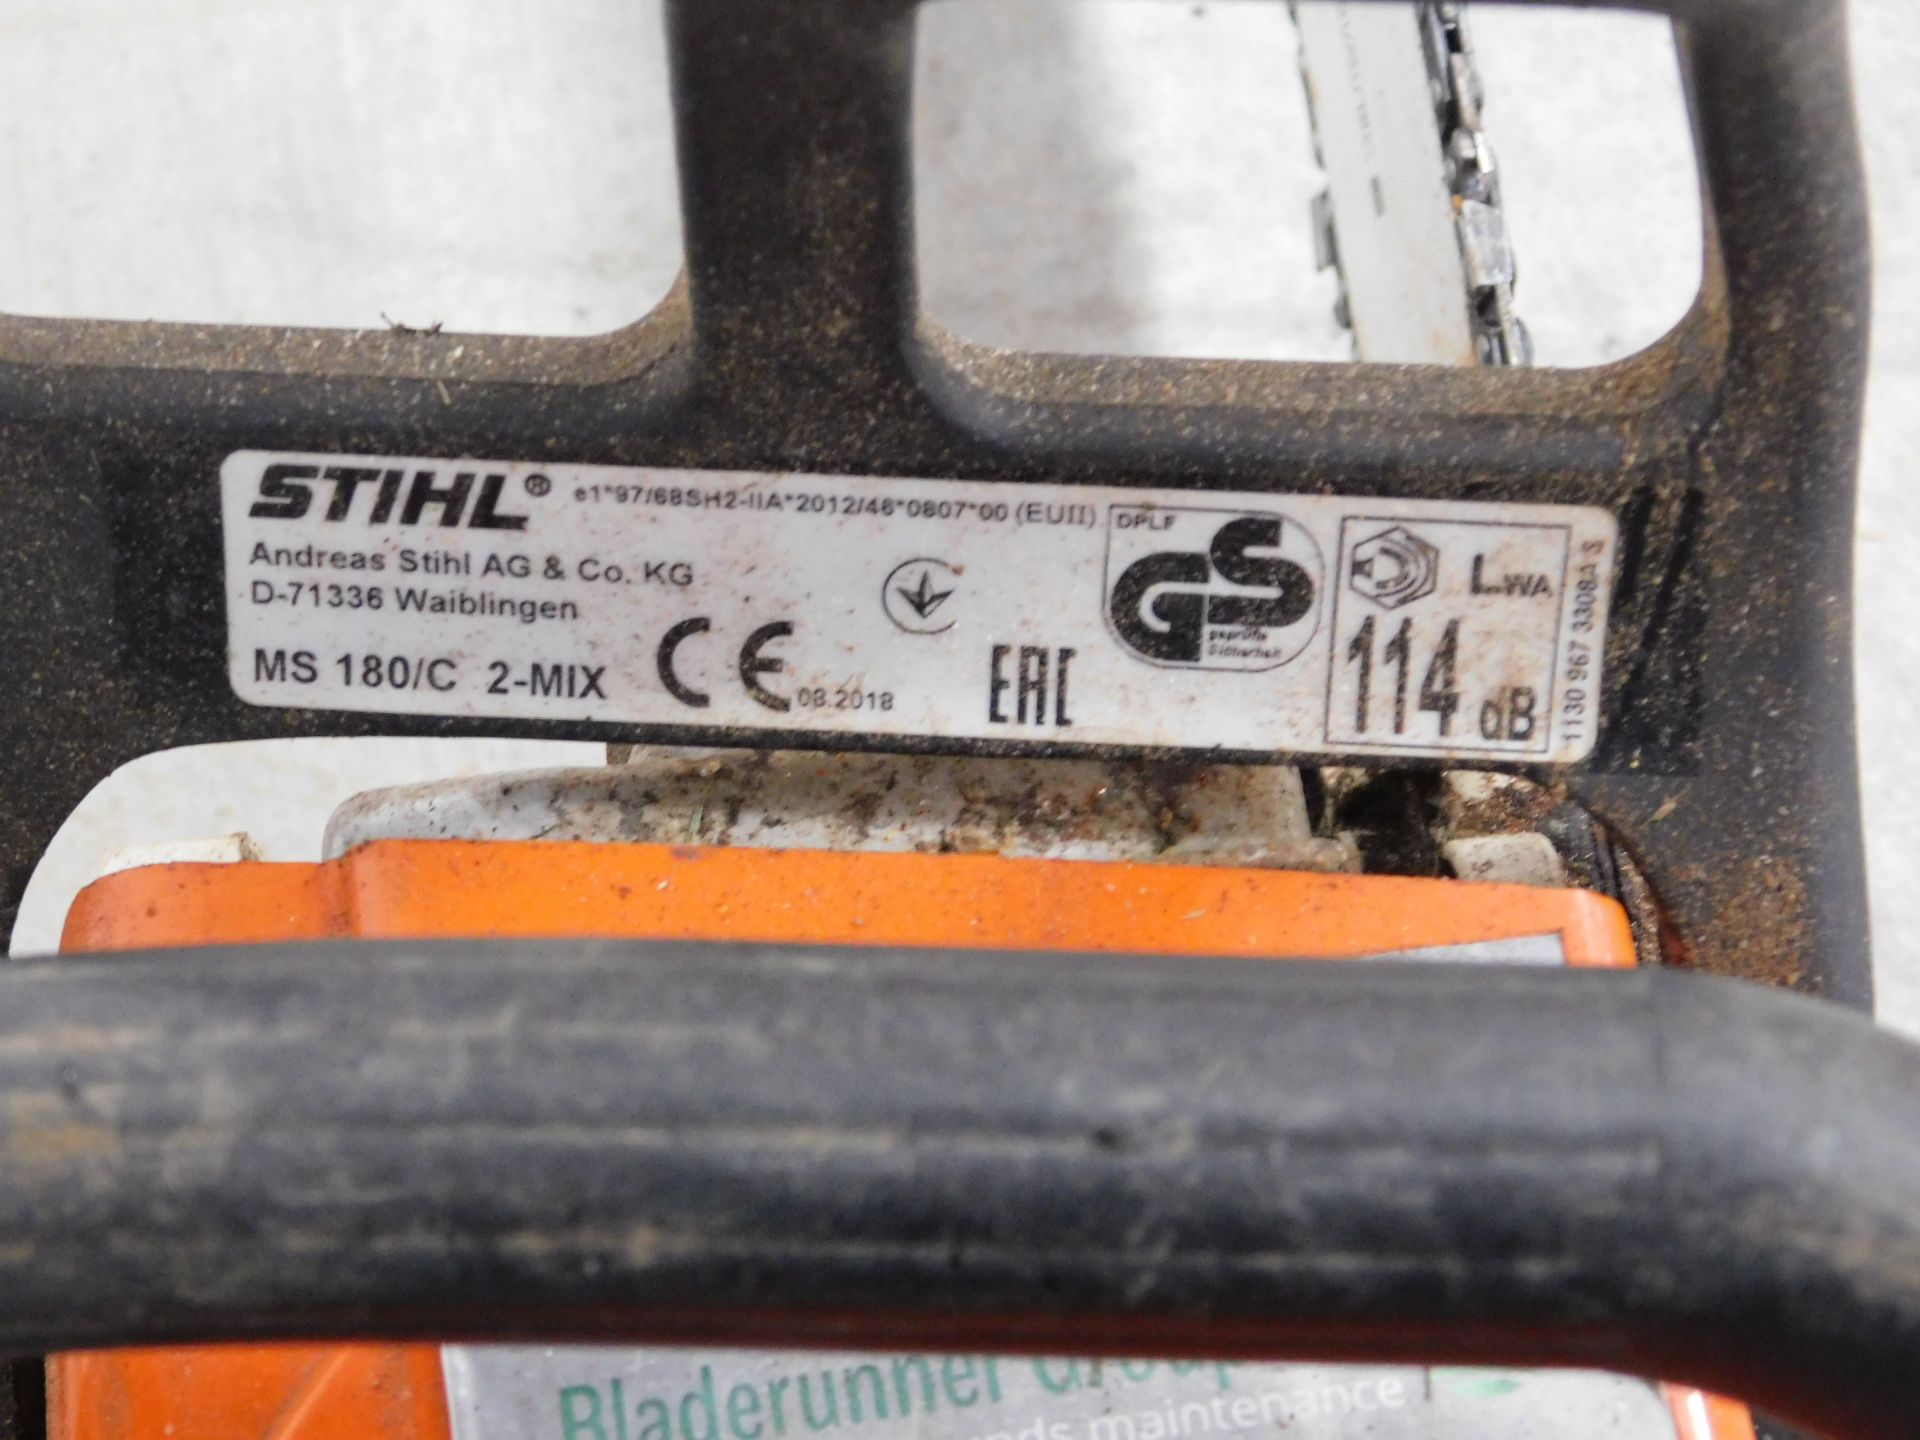 Stihl MS 180 Petrol Chainsaw (Location Brentwood. Please Refer to General Notes) - Image 3 of 3